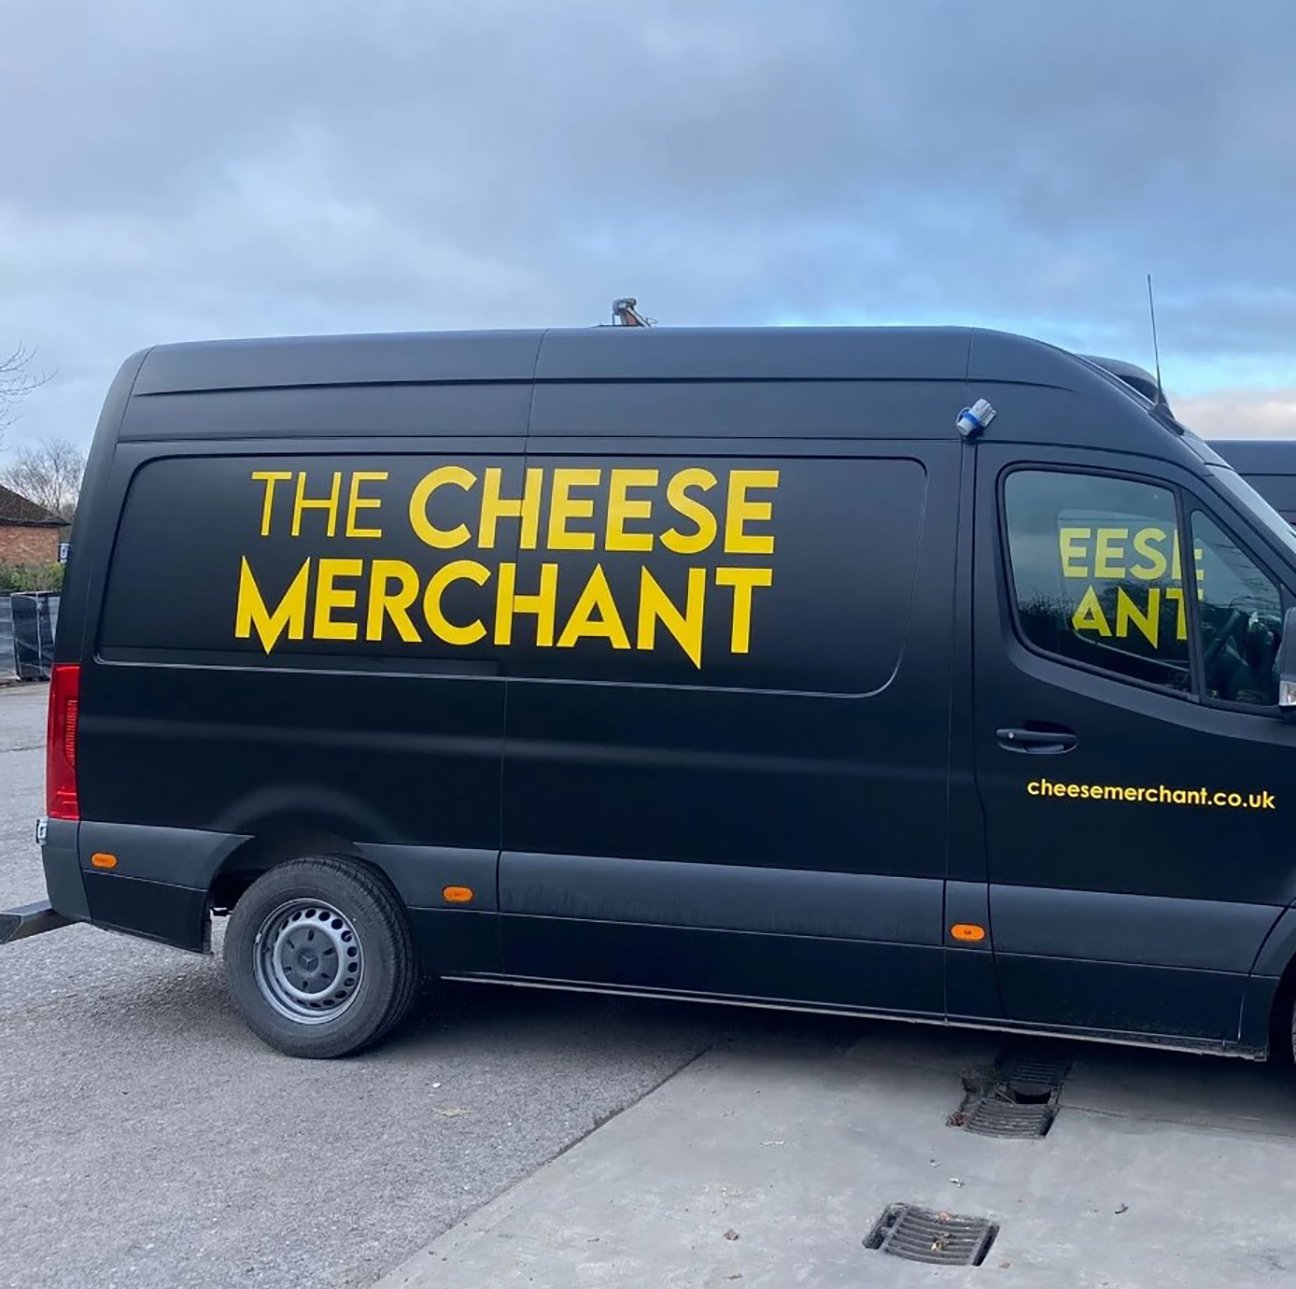 The Cheese Merchant appoints administrators following closure